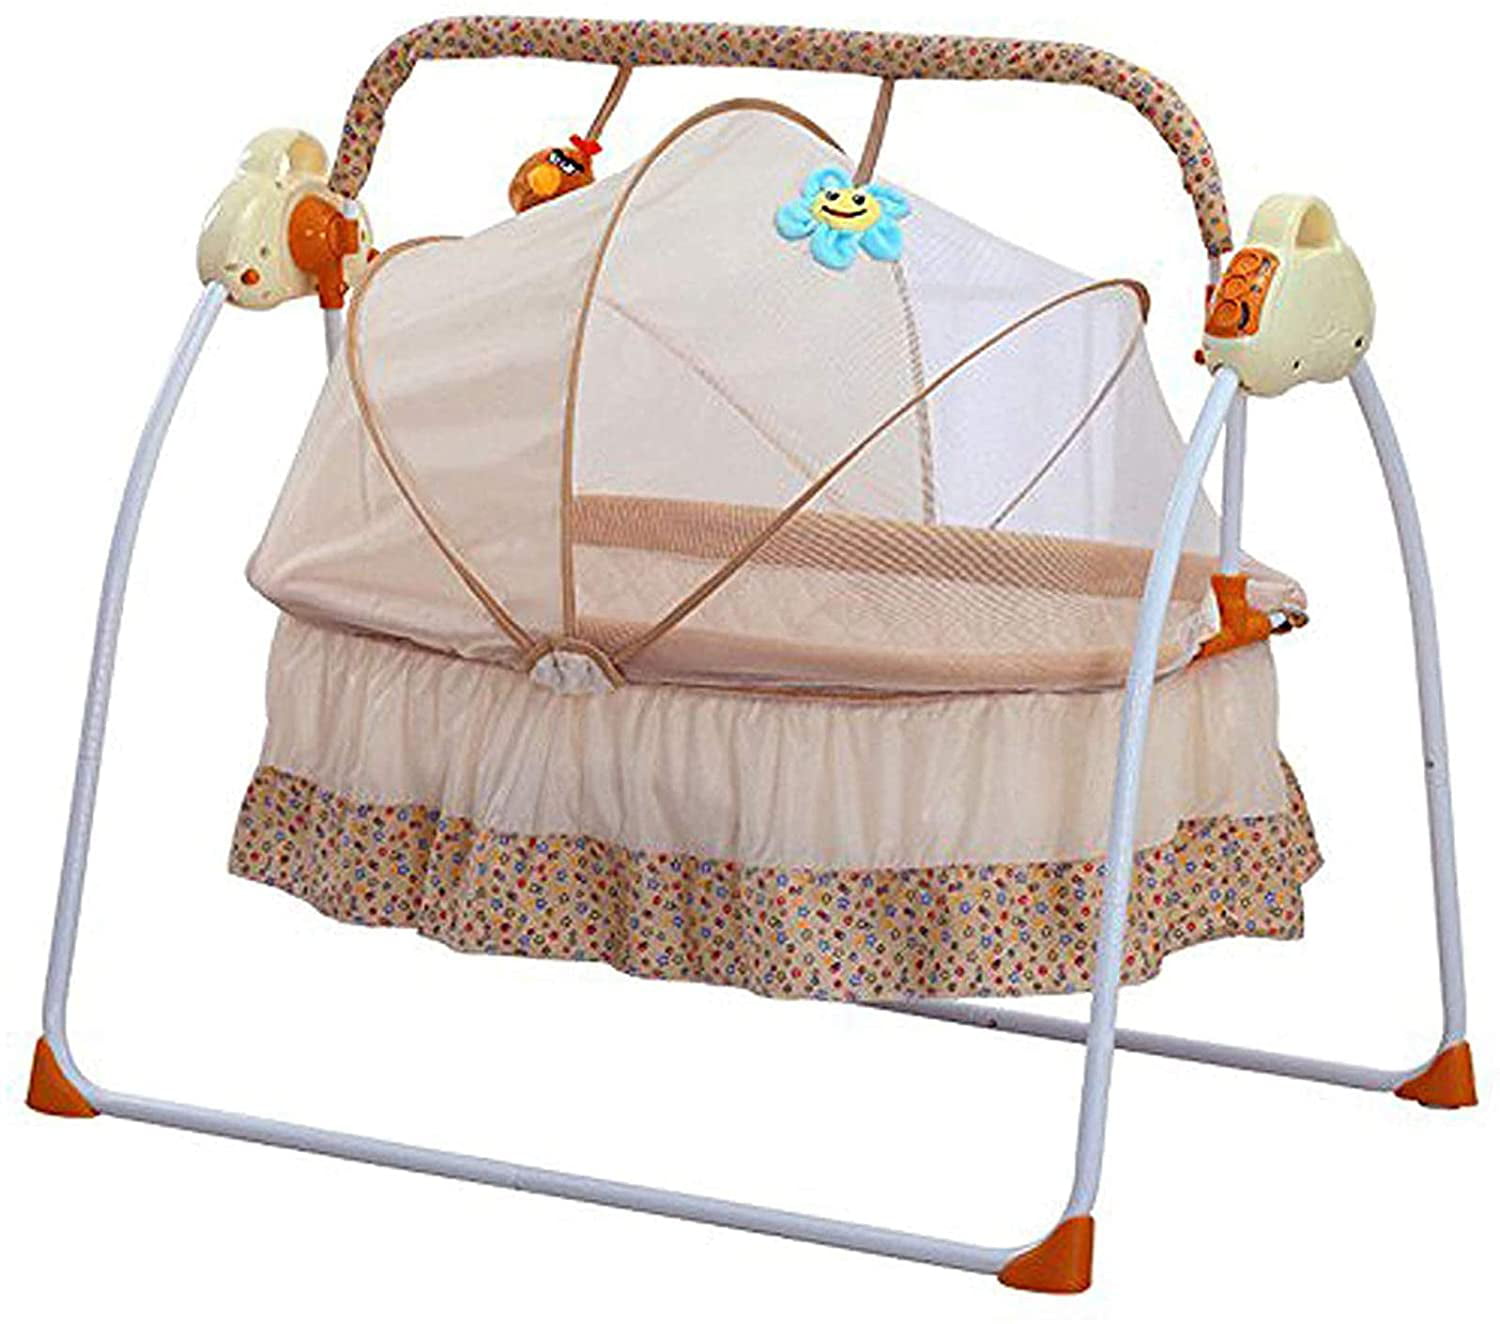 Cradle Rocking Chair Swings net Bed Basket Portable with Music 0-18 Months Blue 